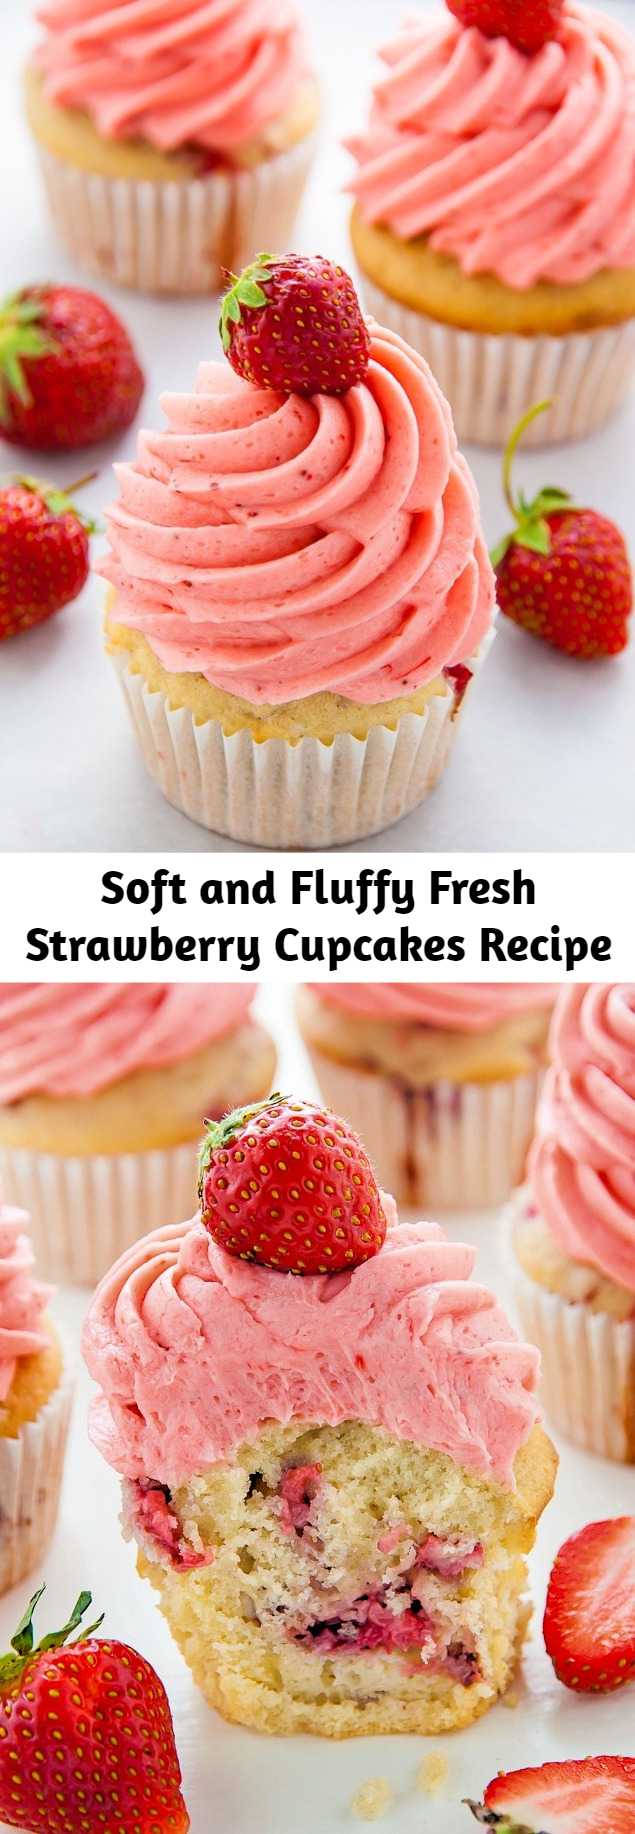 Supremely moist strawberry vanilla cupcakes are topped with fresh strawberry buttercream. These fluffy vanilla cupcakes are bursting with juicy pockets of strawberry and the hot pink frosting is so pretty and delicious. These are the perfect Summer cupcakes!